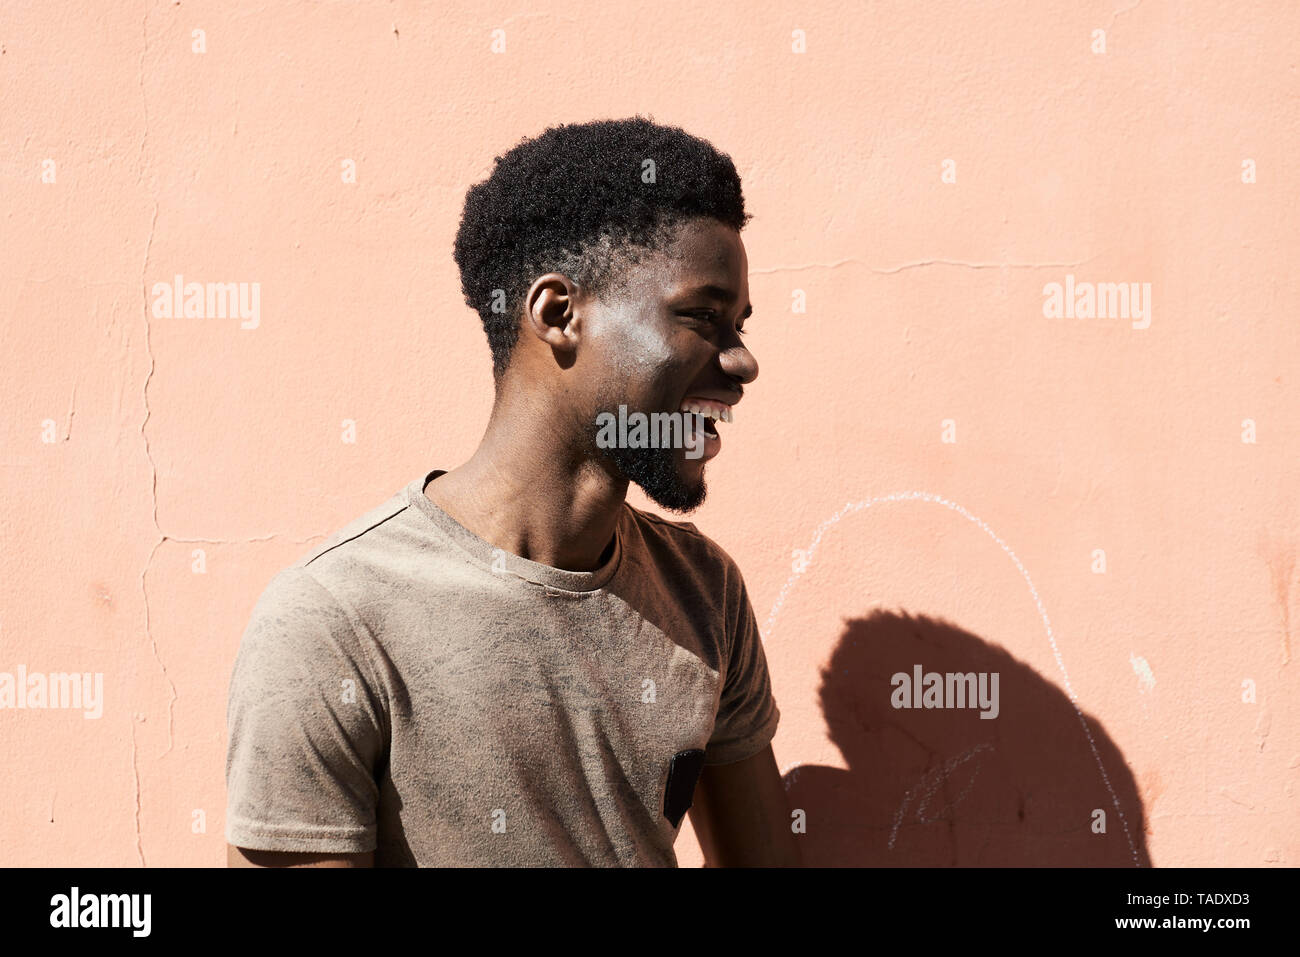 Portrait of a young man laughing outdoors Banque D'Images